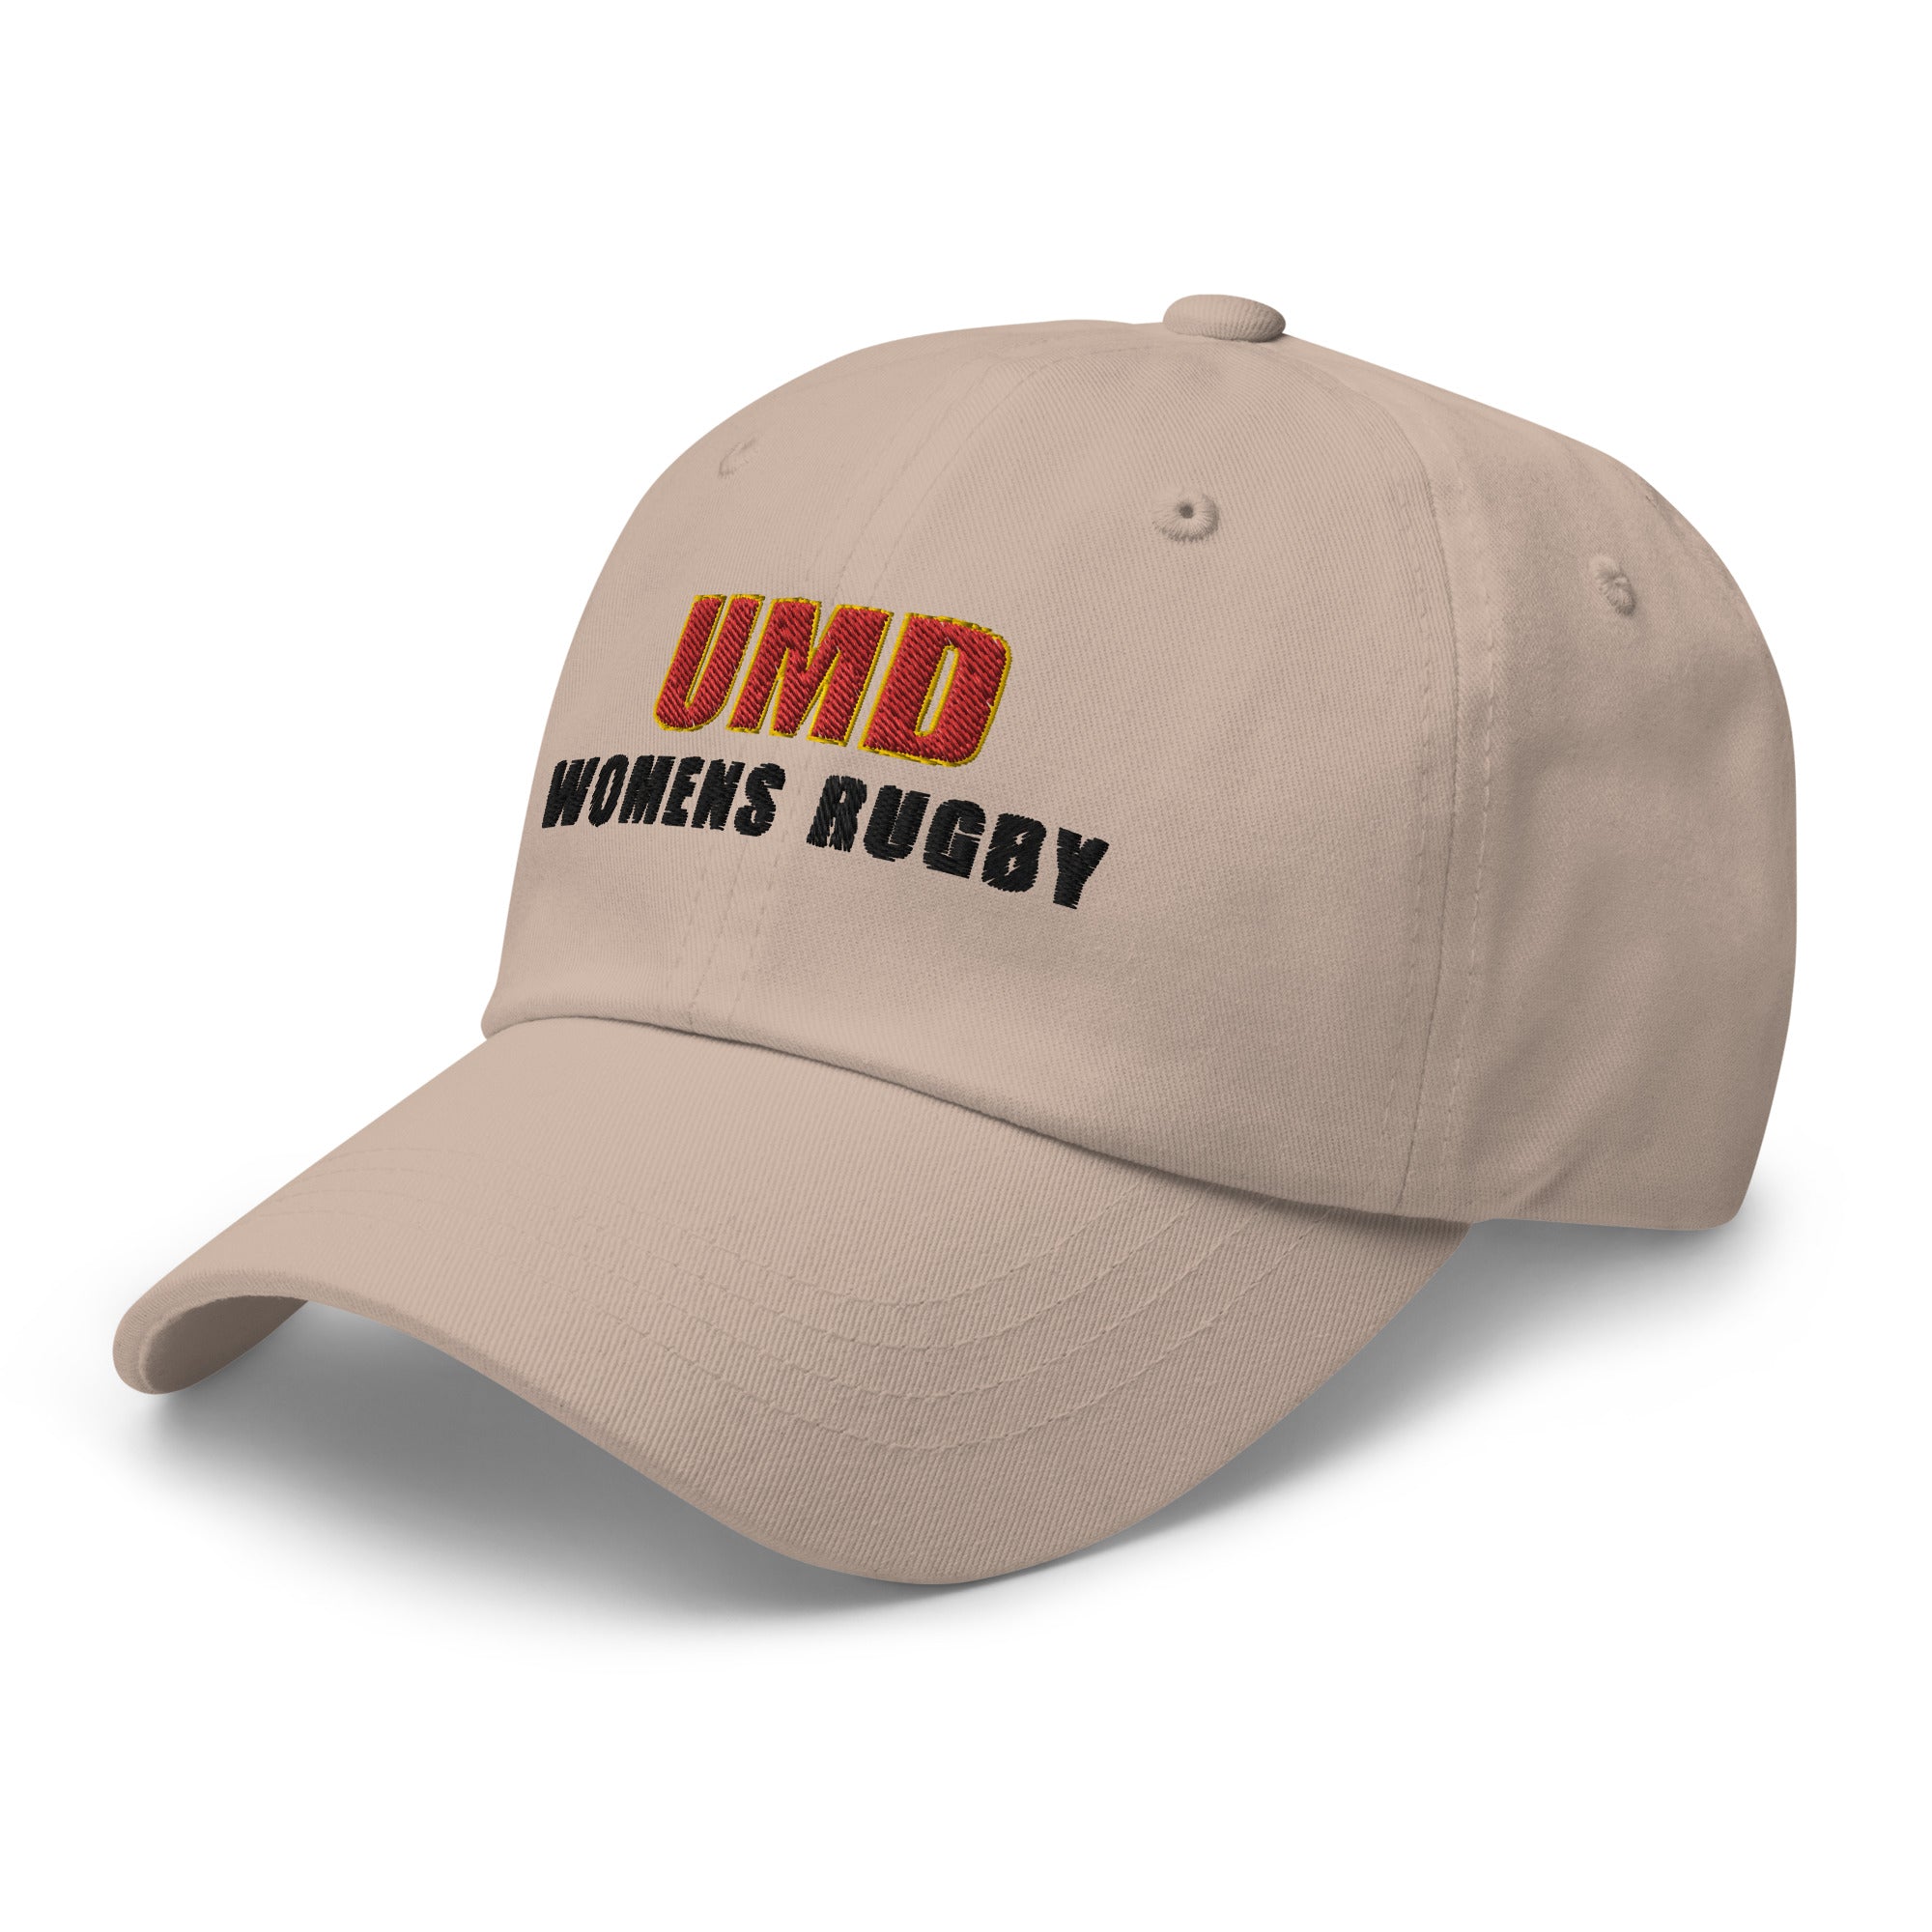 Rugby Imports Dad hat